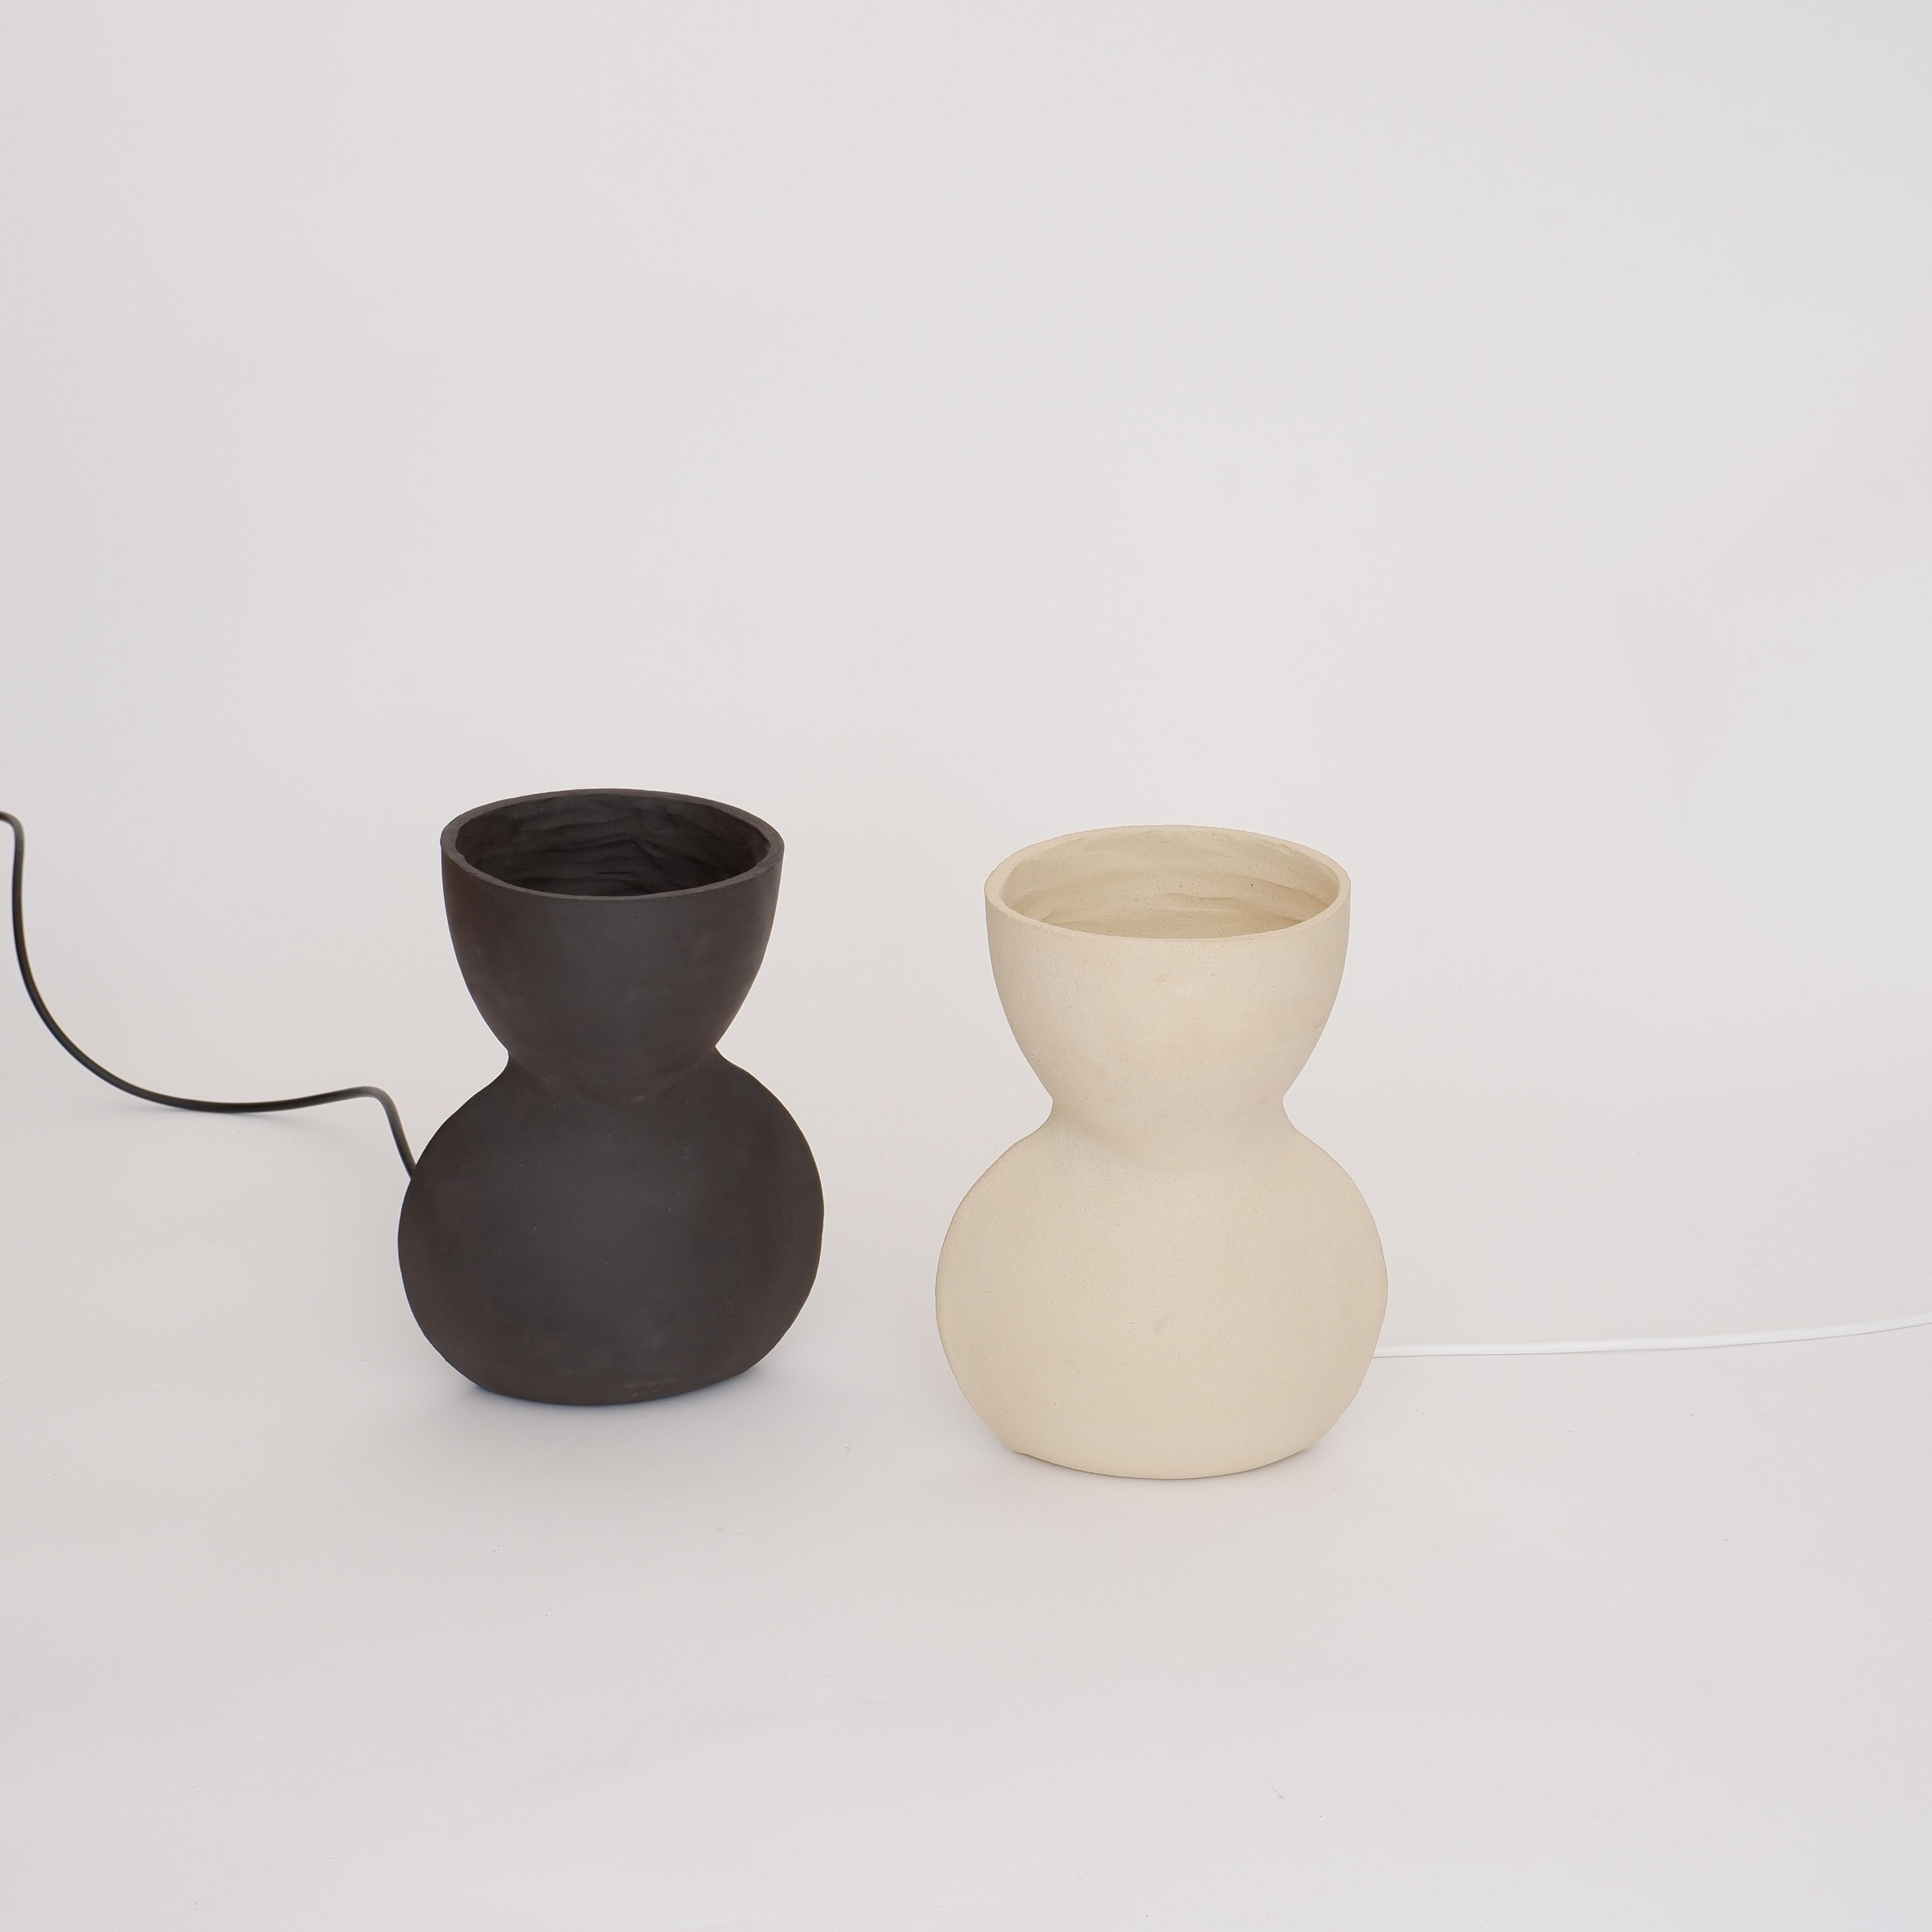 Set Of 2 Unira Small Black And White Lamps by Ia Kutateladze
One Of A Kind.
Dimensions: D 14 x W 18 x H 25 cm.
Materials: Clay.

Each piece is one of a kind, due to its free hand-building process. Different color variations available: raw black